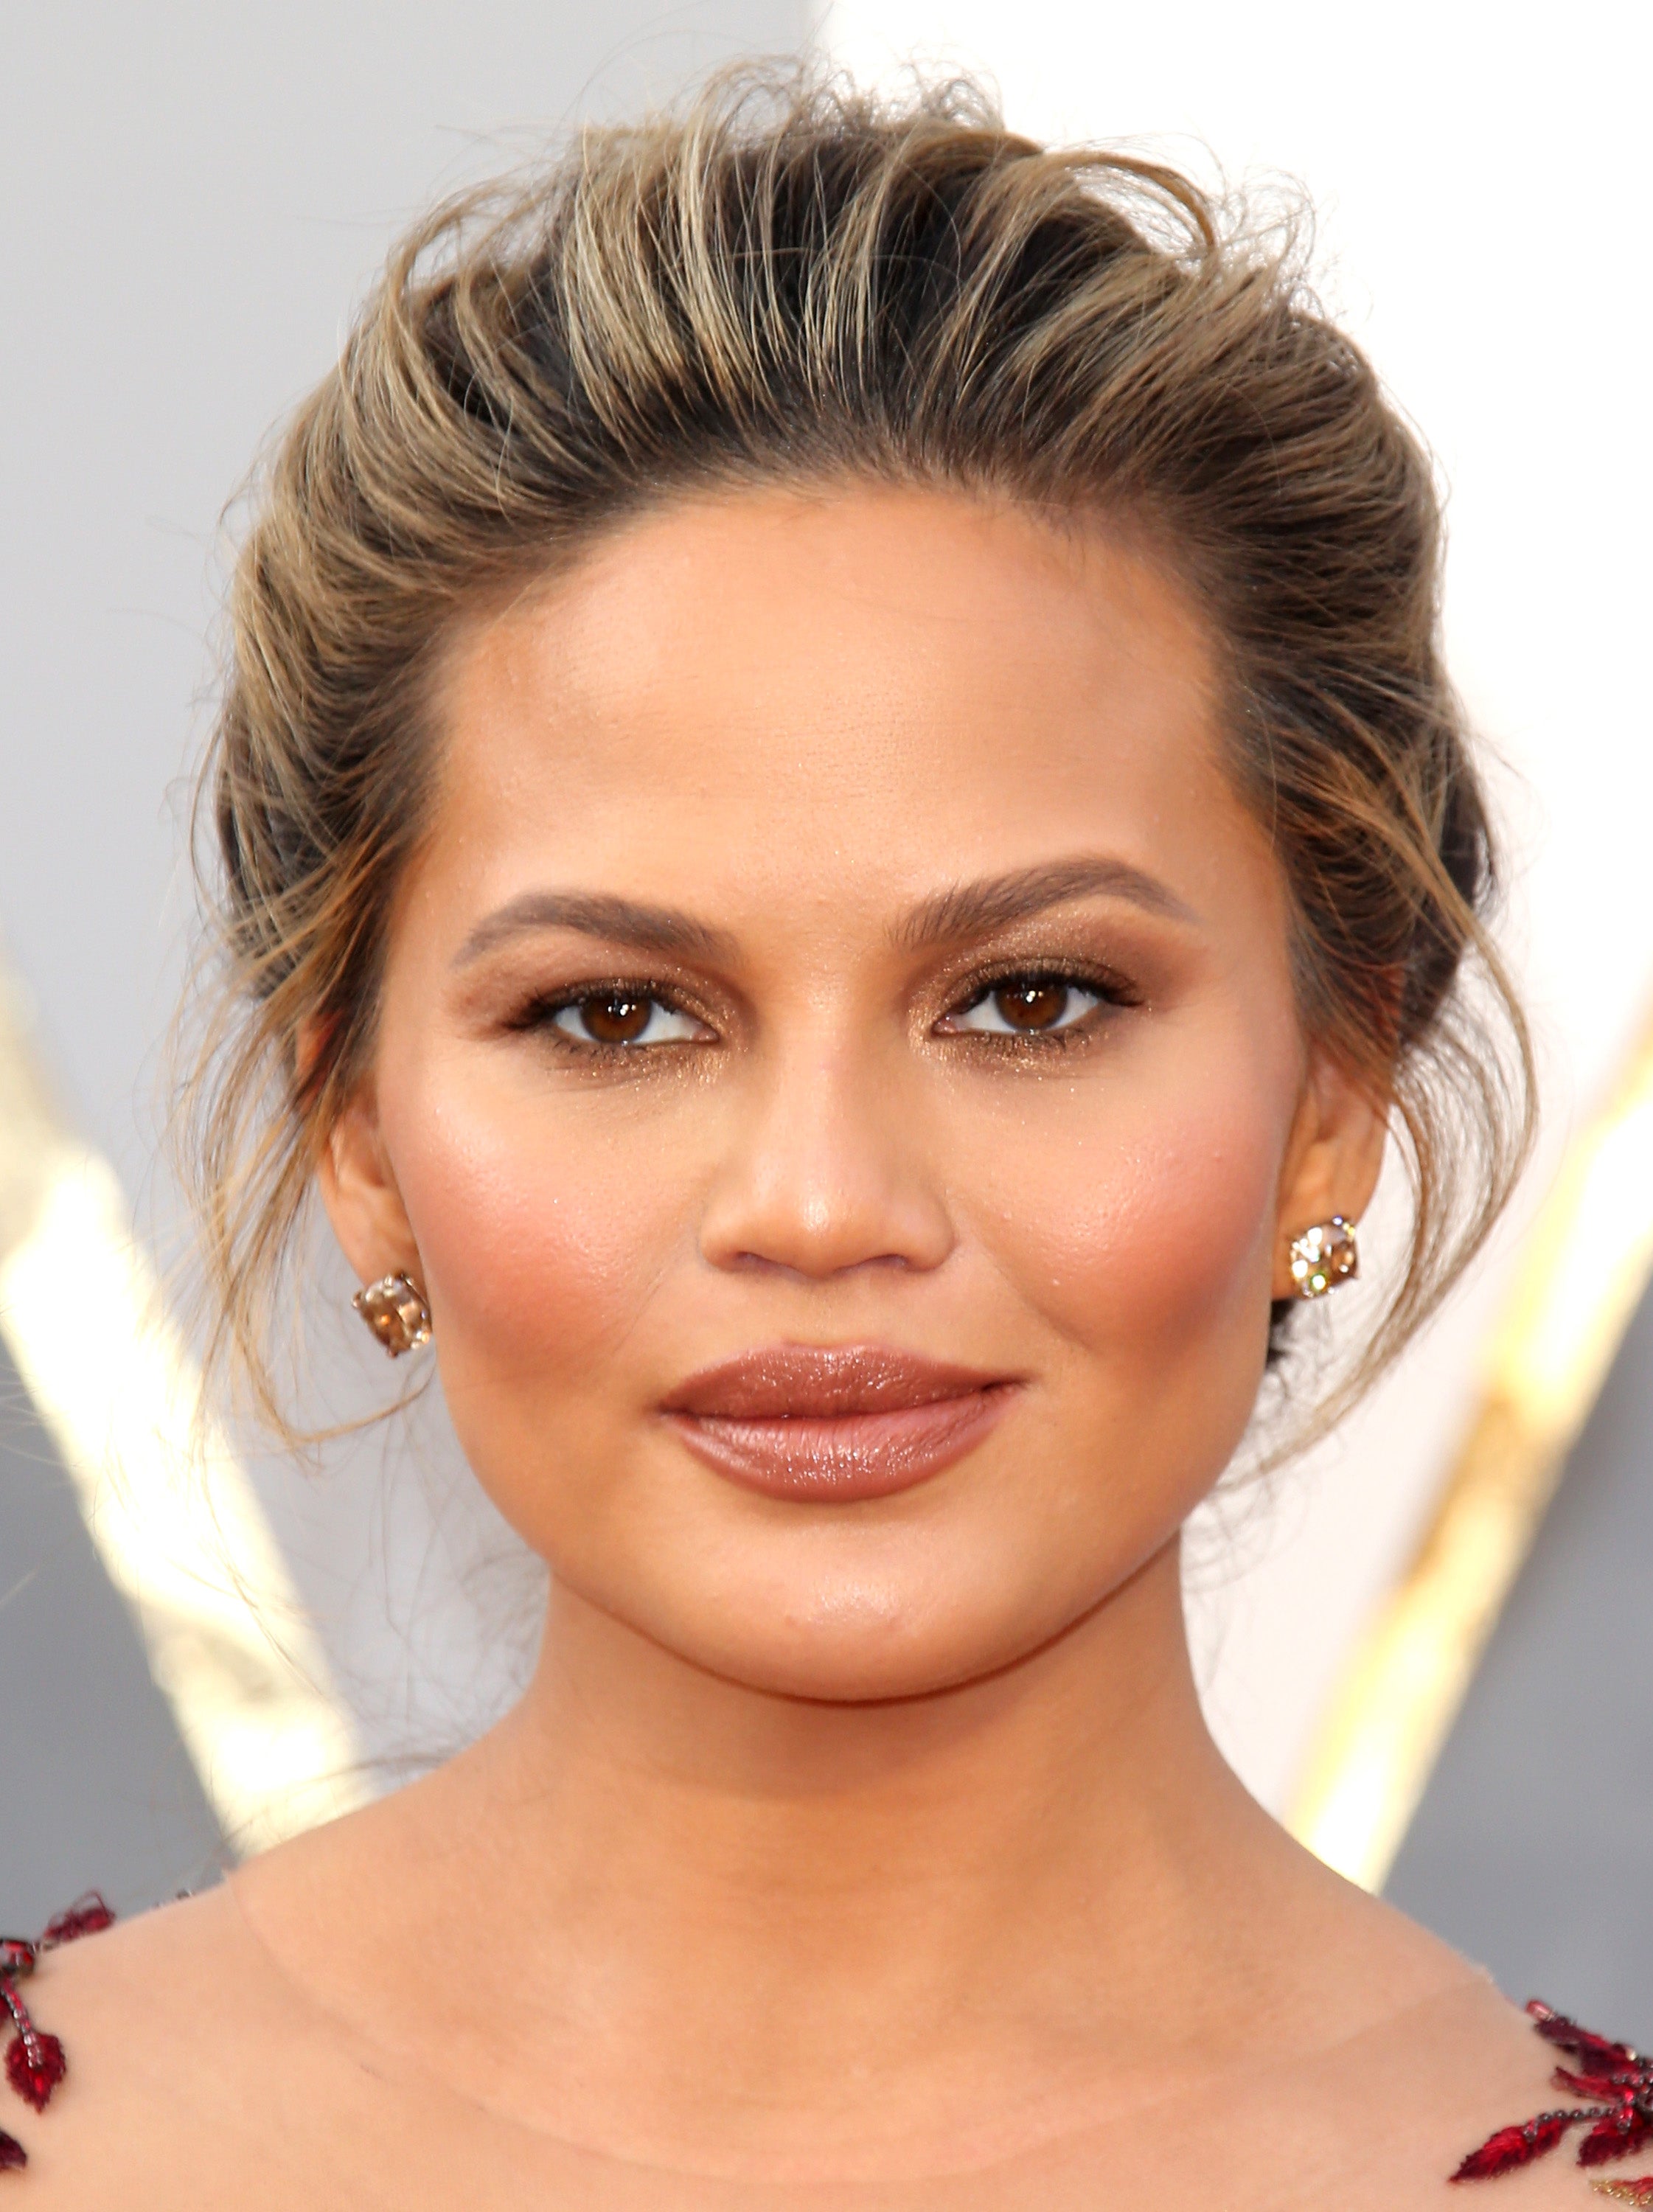 Beauty Guide: Chrissy Teigen's Super Chic (And Affordable) Academy Awards Beauty Look